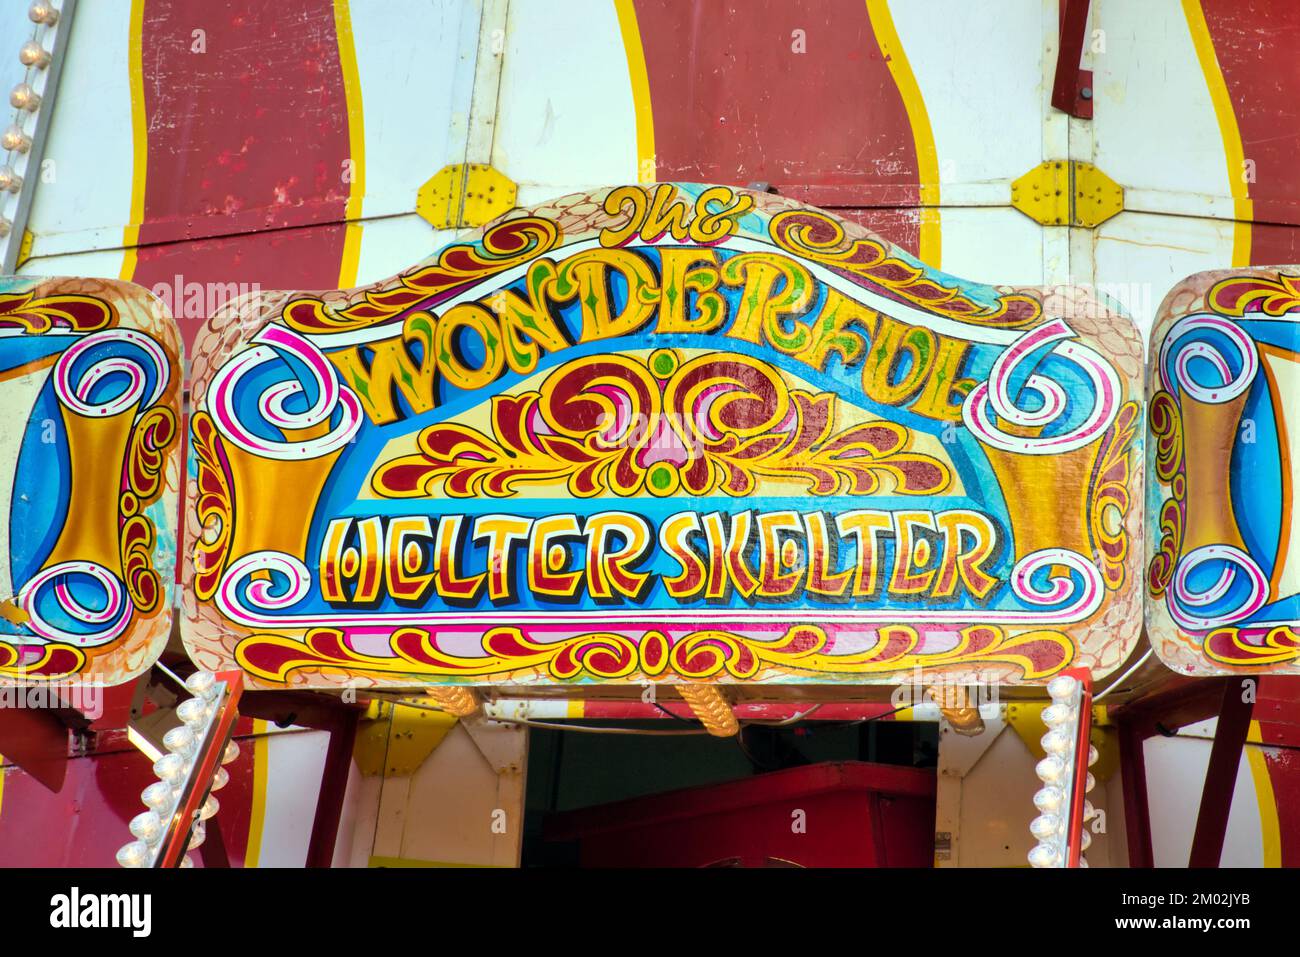 helter skelter detail text and logo Stock Photo